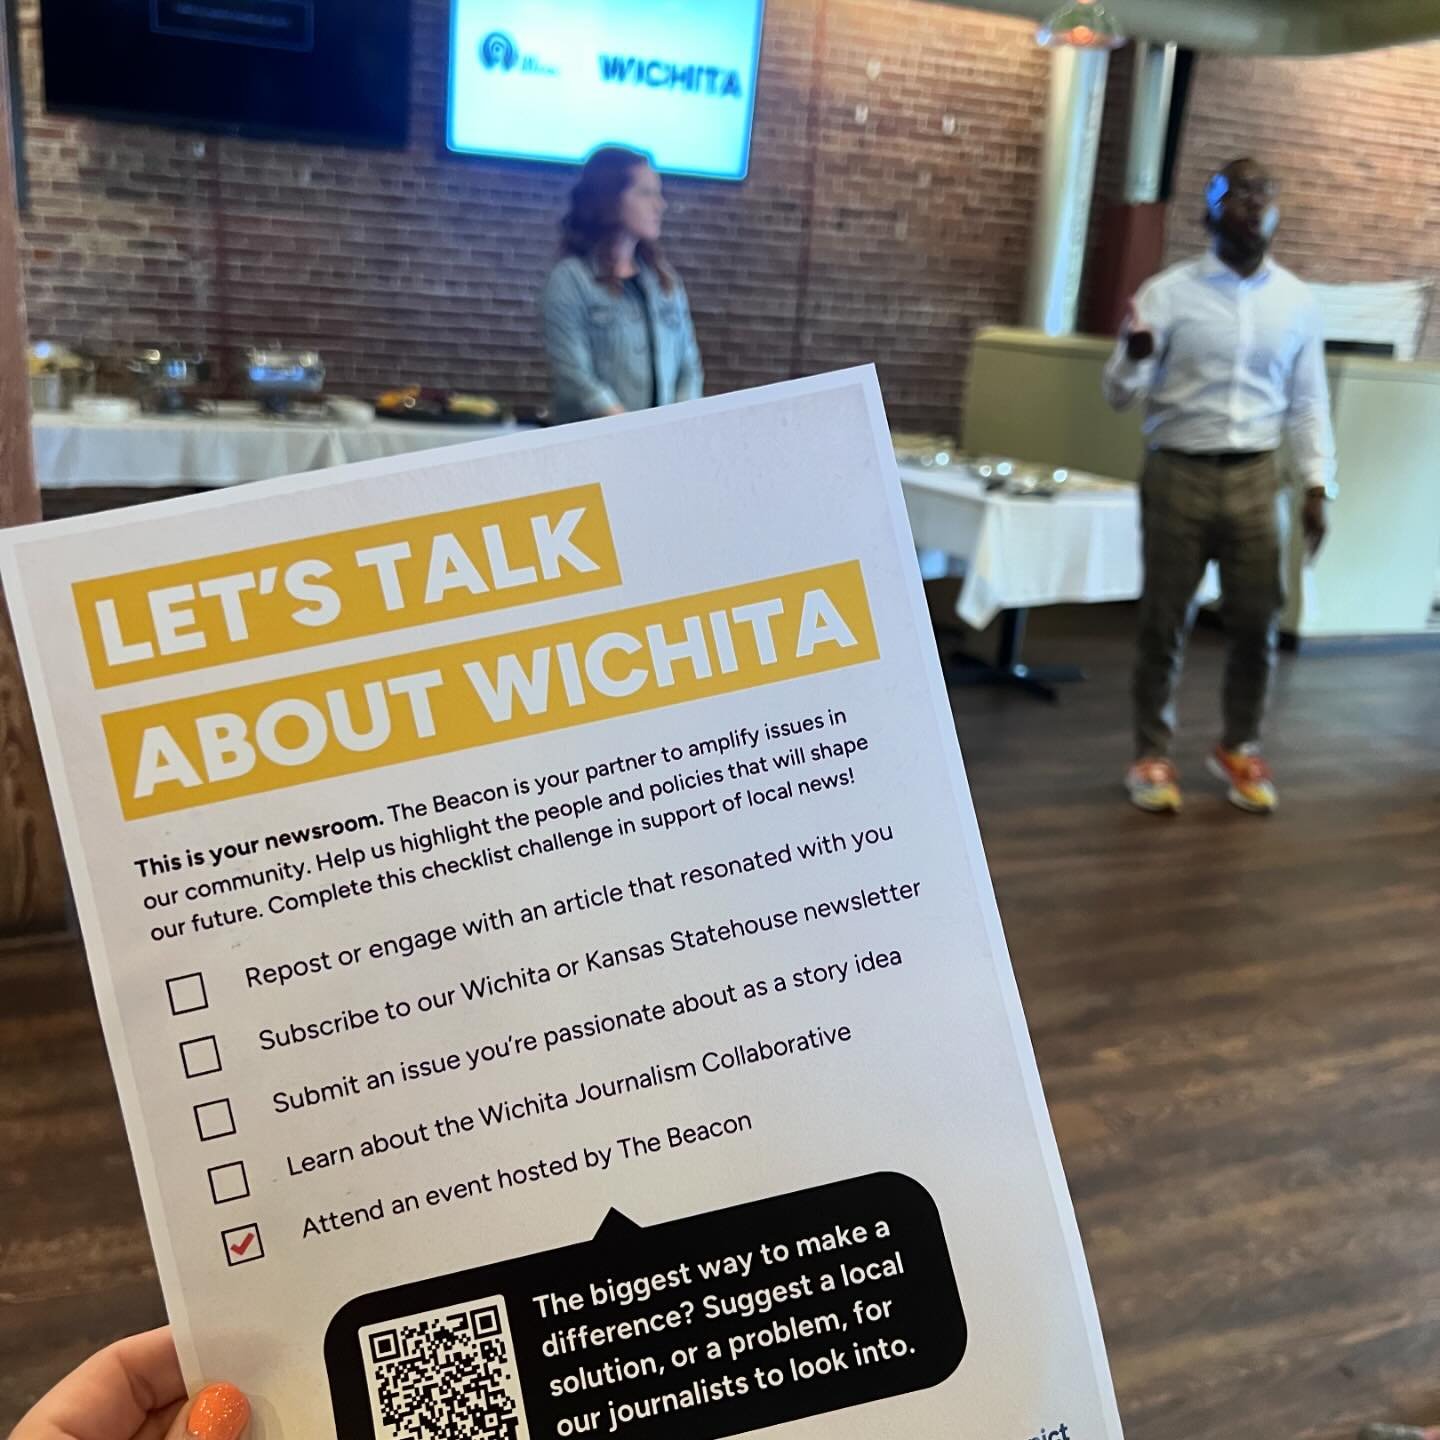 Huge thanks to Cohort Two alum, Jordan Walker (@jay.walker.20) &amp; Joseph Shepard for hosting an evening with The Beacon Wichita (@thebeaconict) last week! Several change-makers from The Thread community (and beyond!) attended the event at River Ci